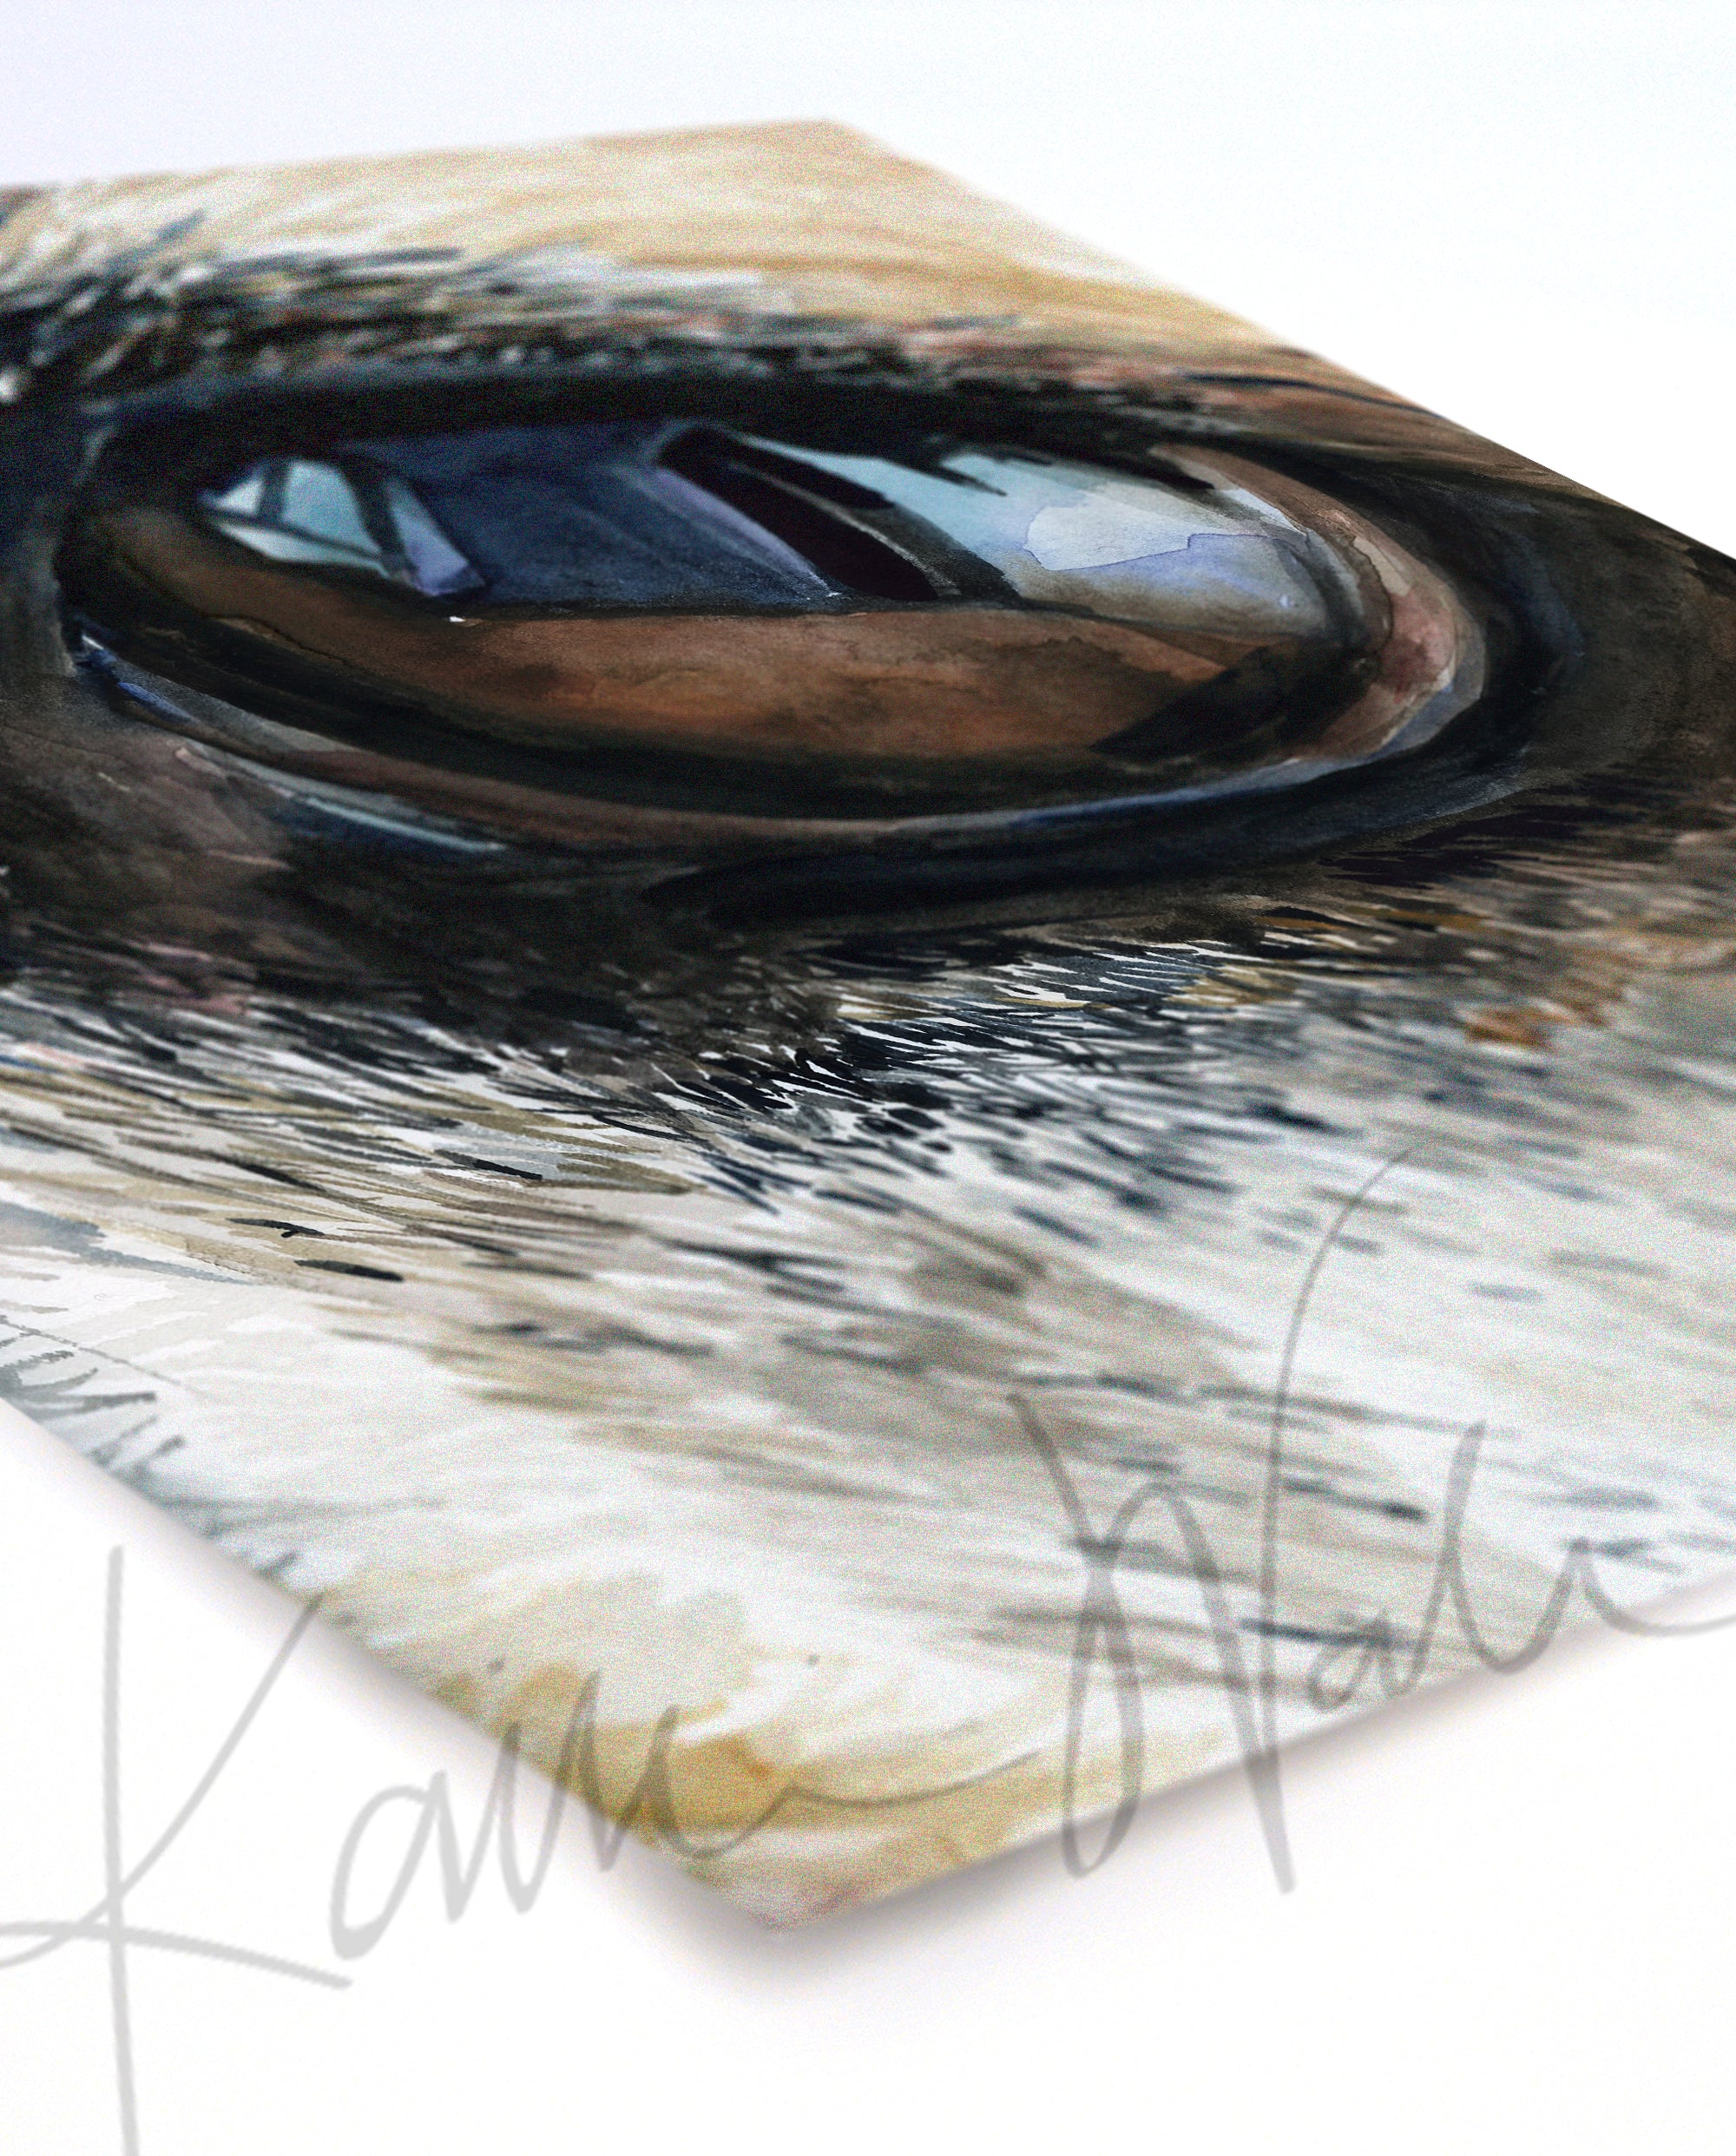 Unframed watercolor painting of a zoomed in perspective of a dog’s eye. The painting is in blacks, tans, and browns and is at an angle.